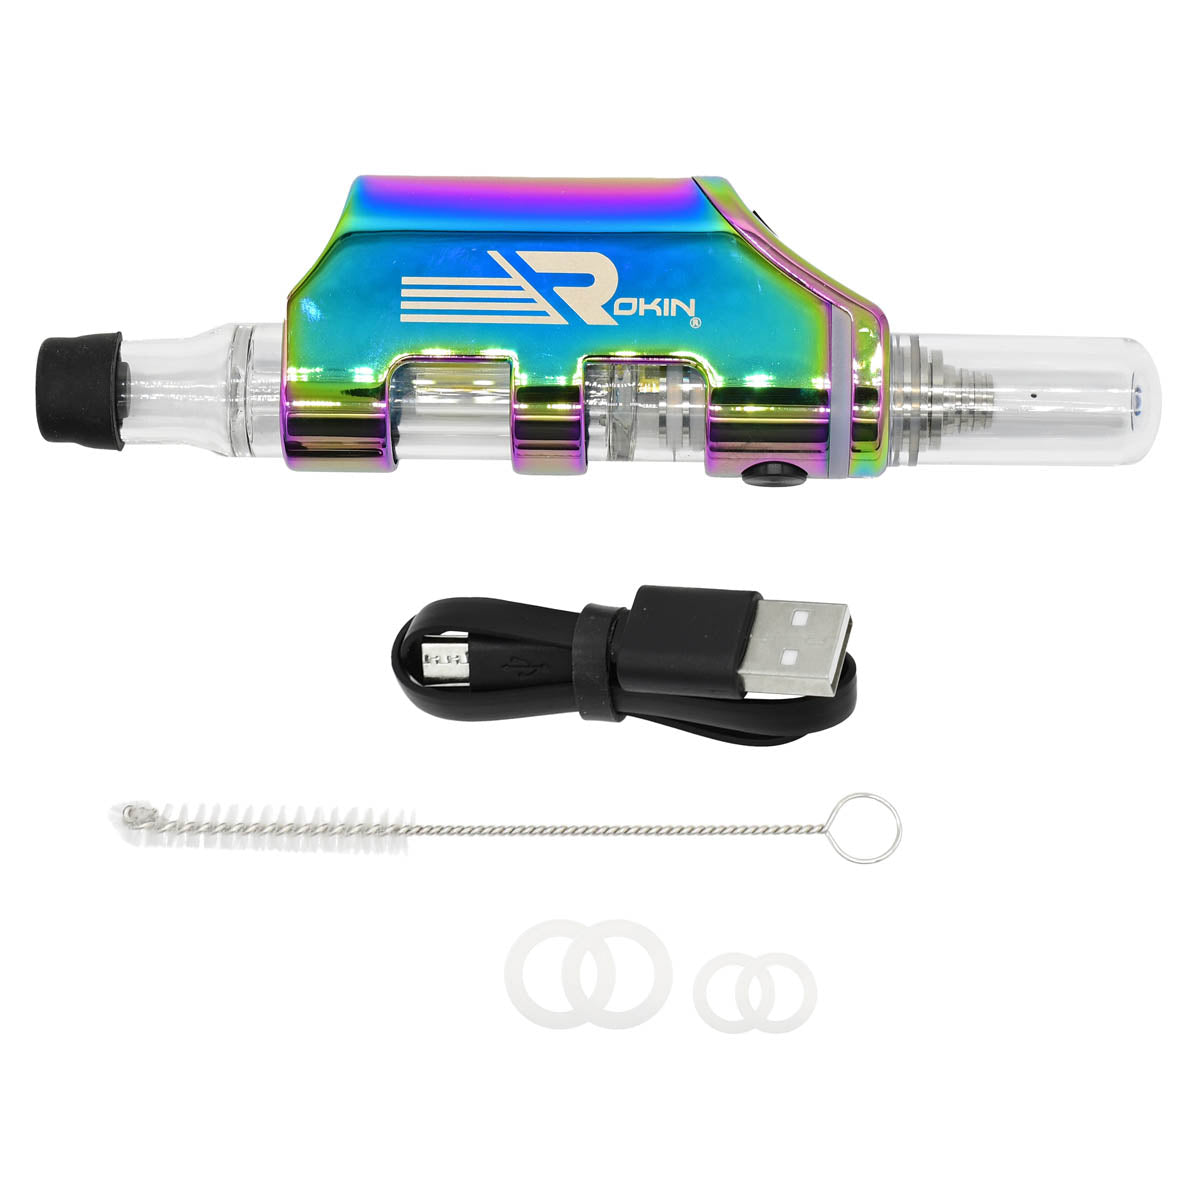 Stinger nectar collector kit elements - Multicolor option